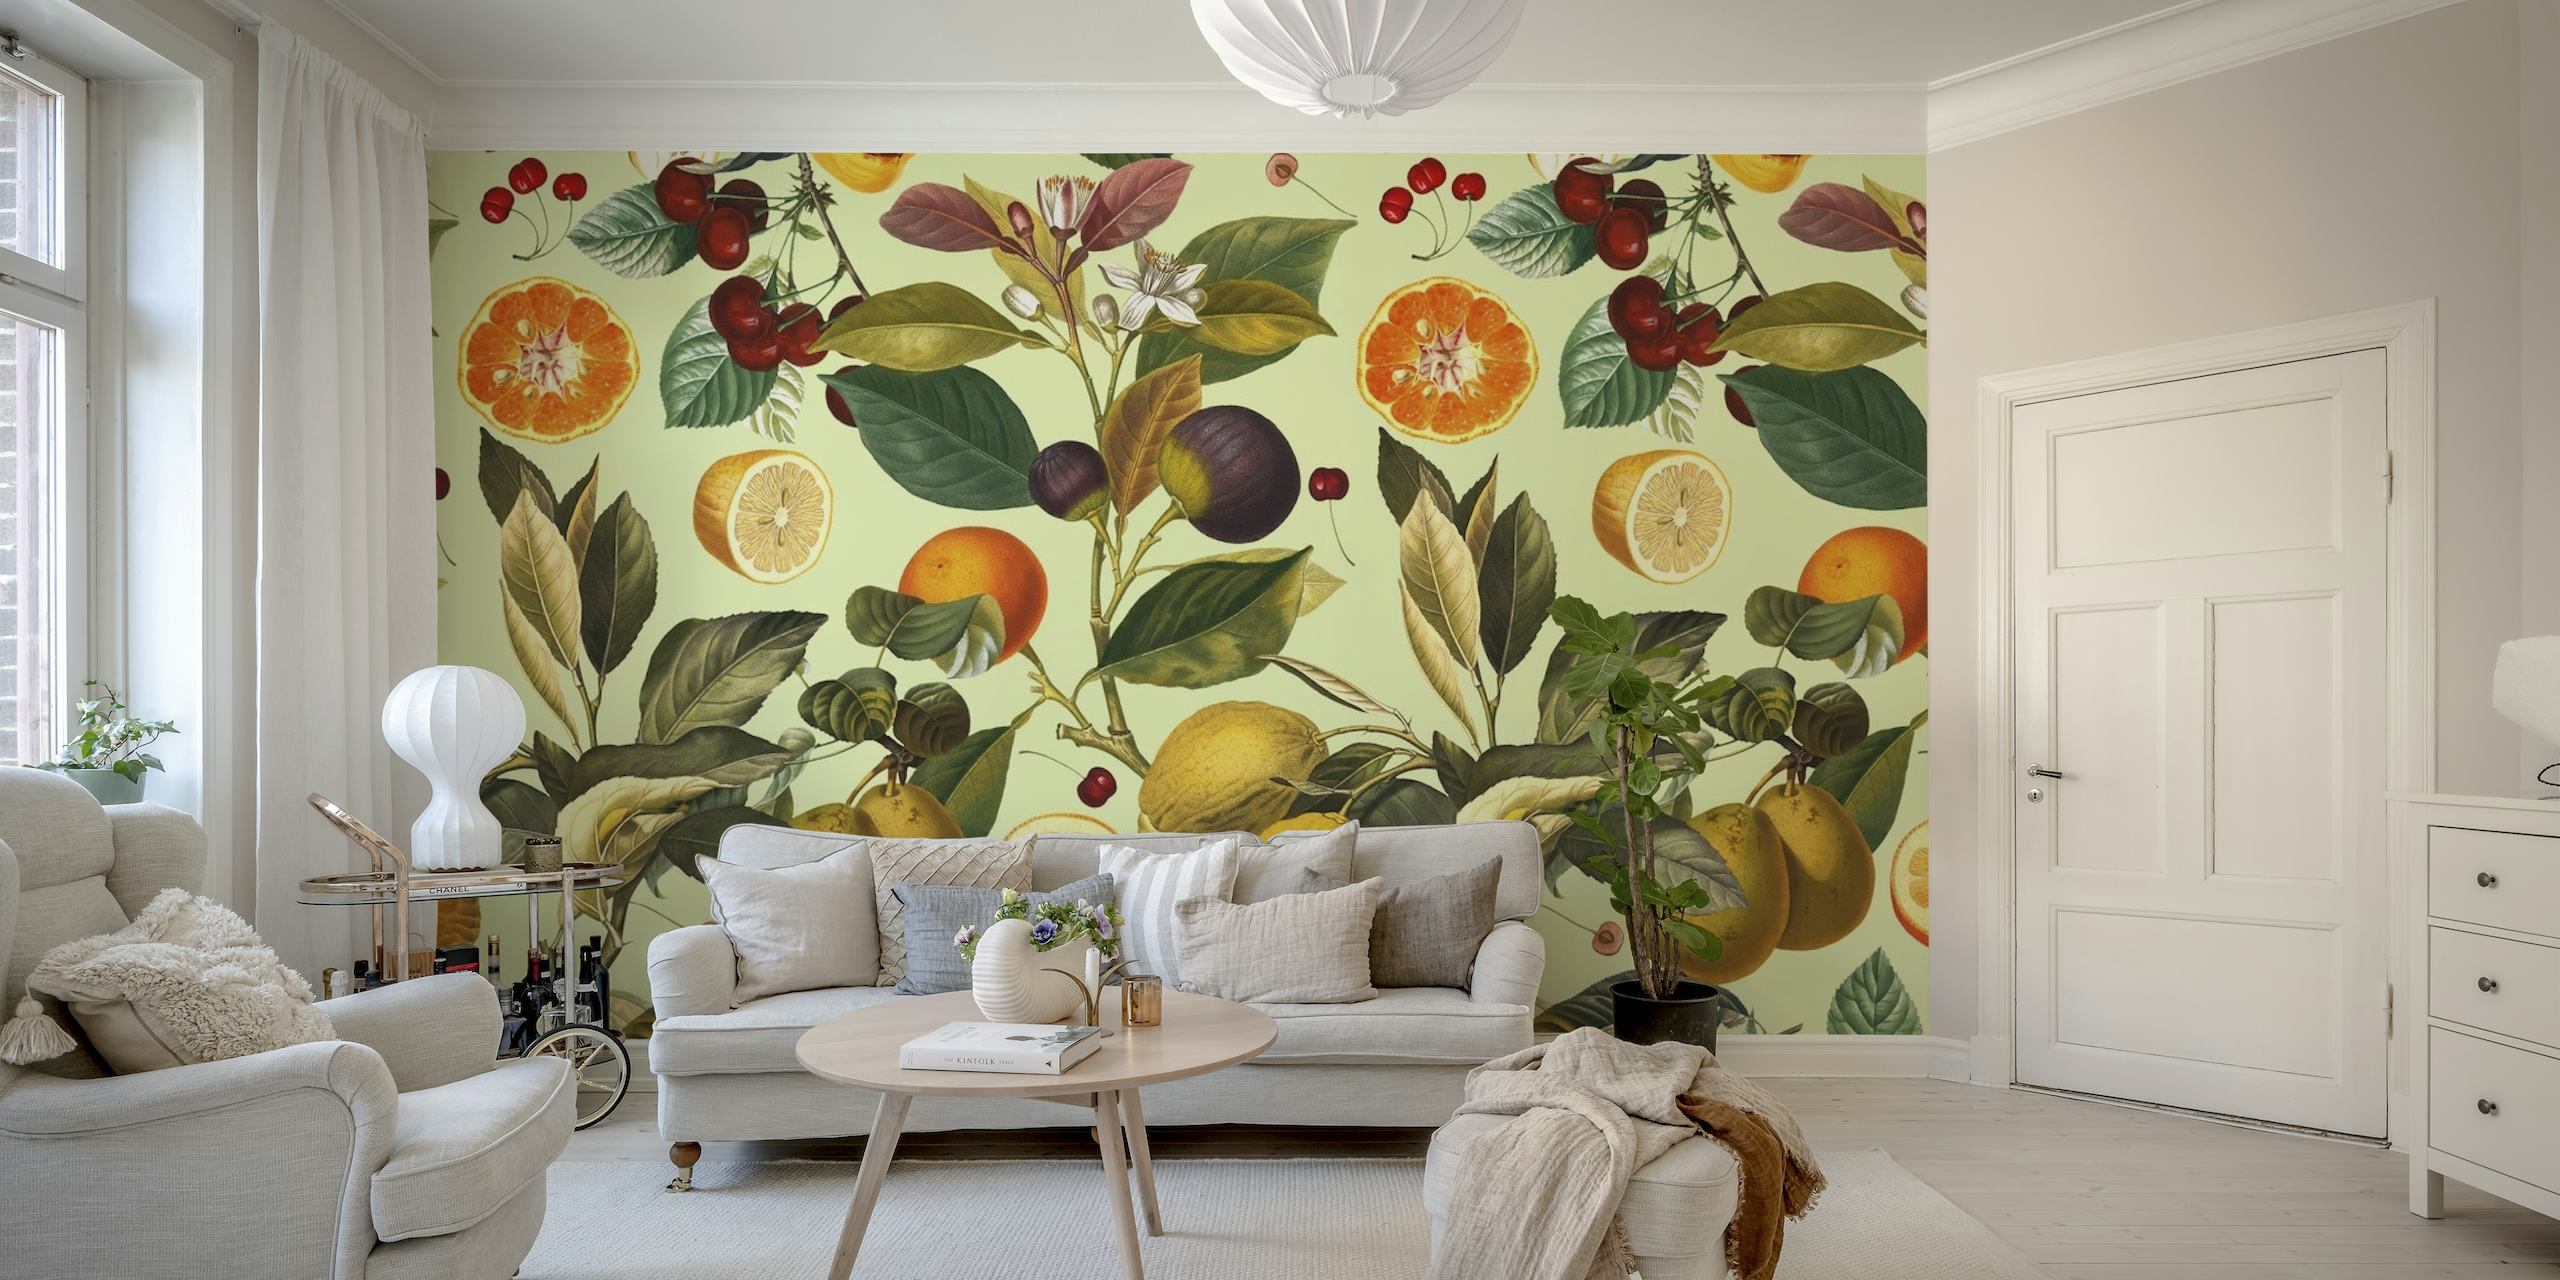 Vintage fruit and botanical pattern wall mural featuring citrus, berries, and plums.